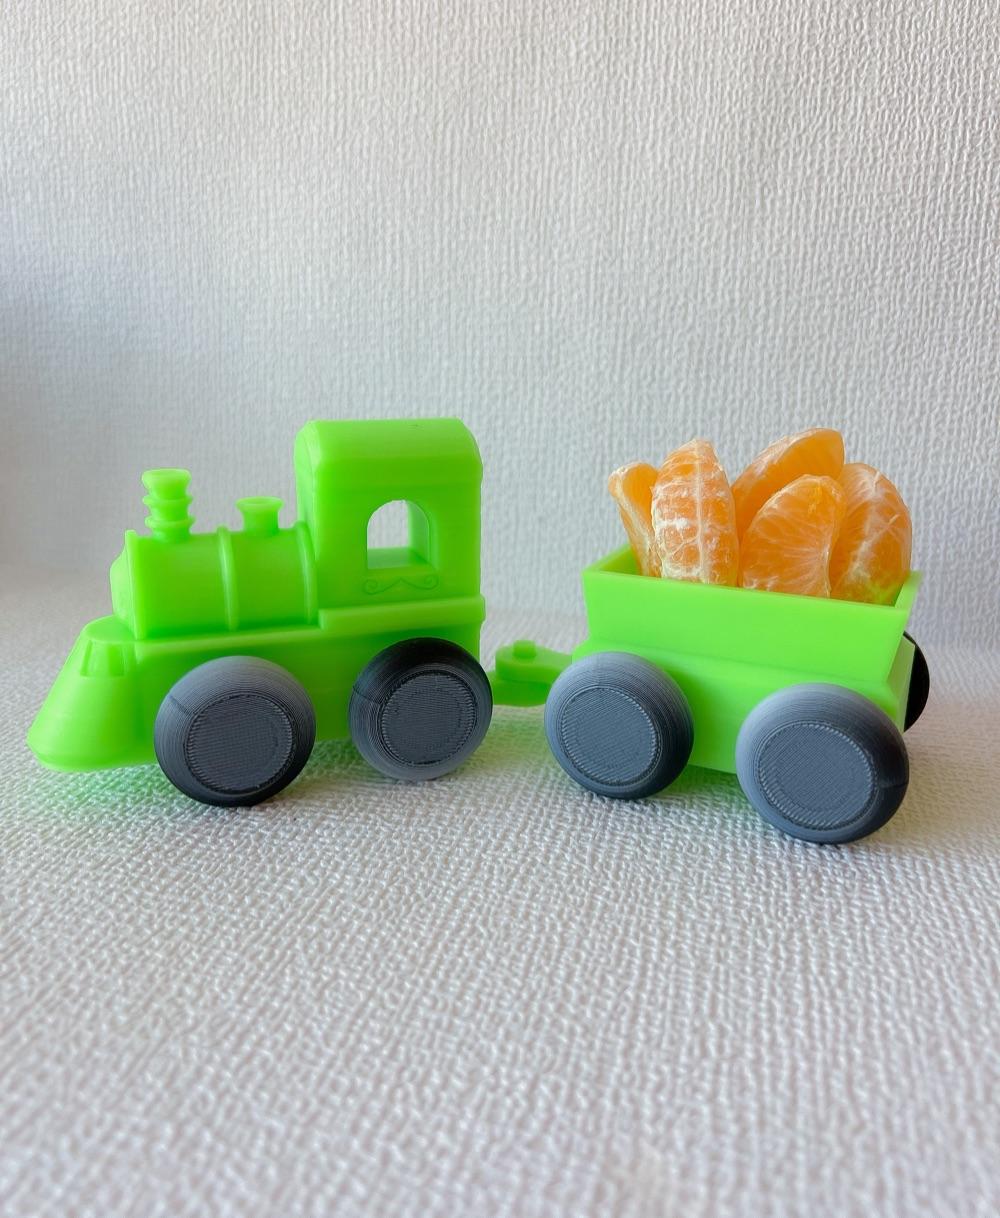  Christmas Toy Train - The fruit train!
Polymaker filament. - 3d model